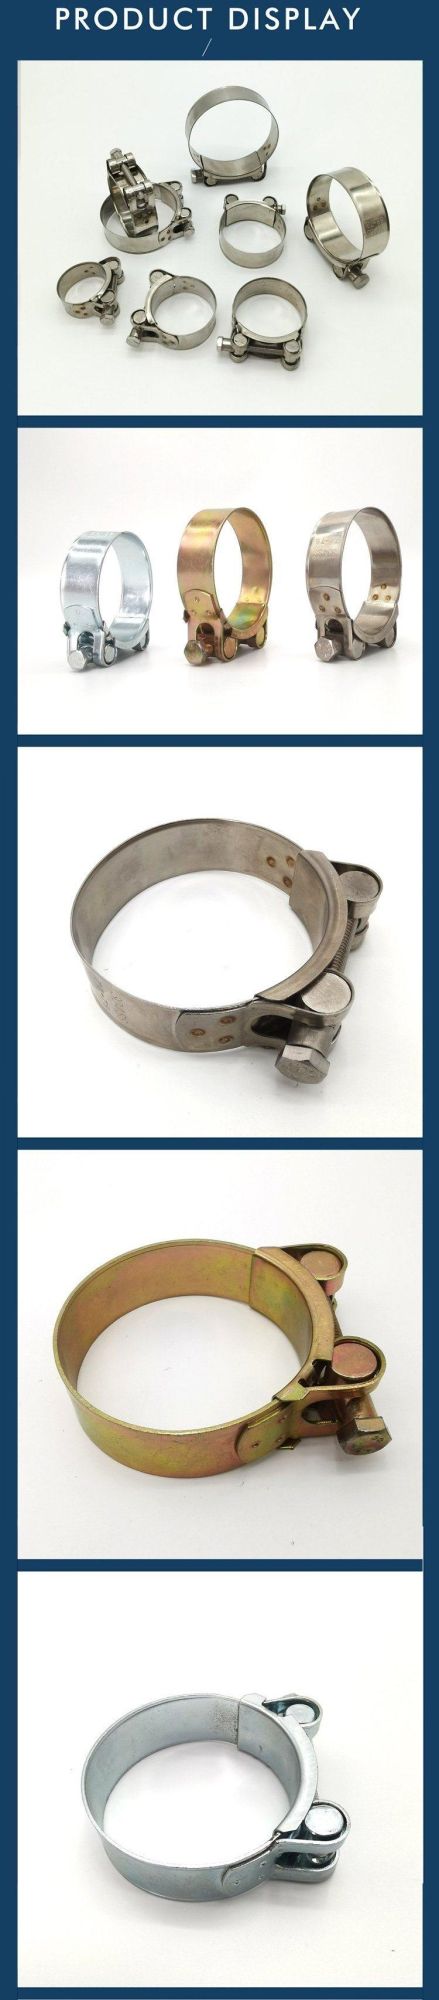 Galvanized Steel Heavy Duty Hose Clamps Single Bolt Pipe Clamp